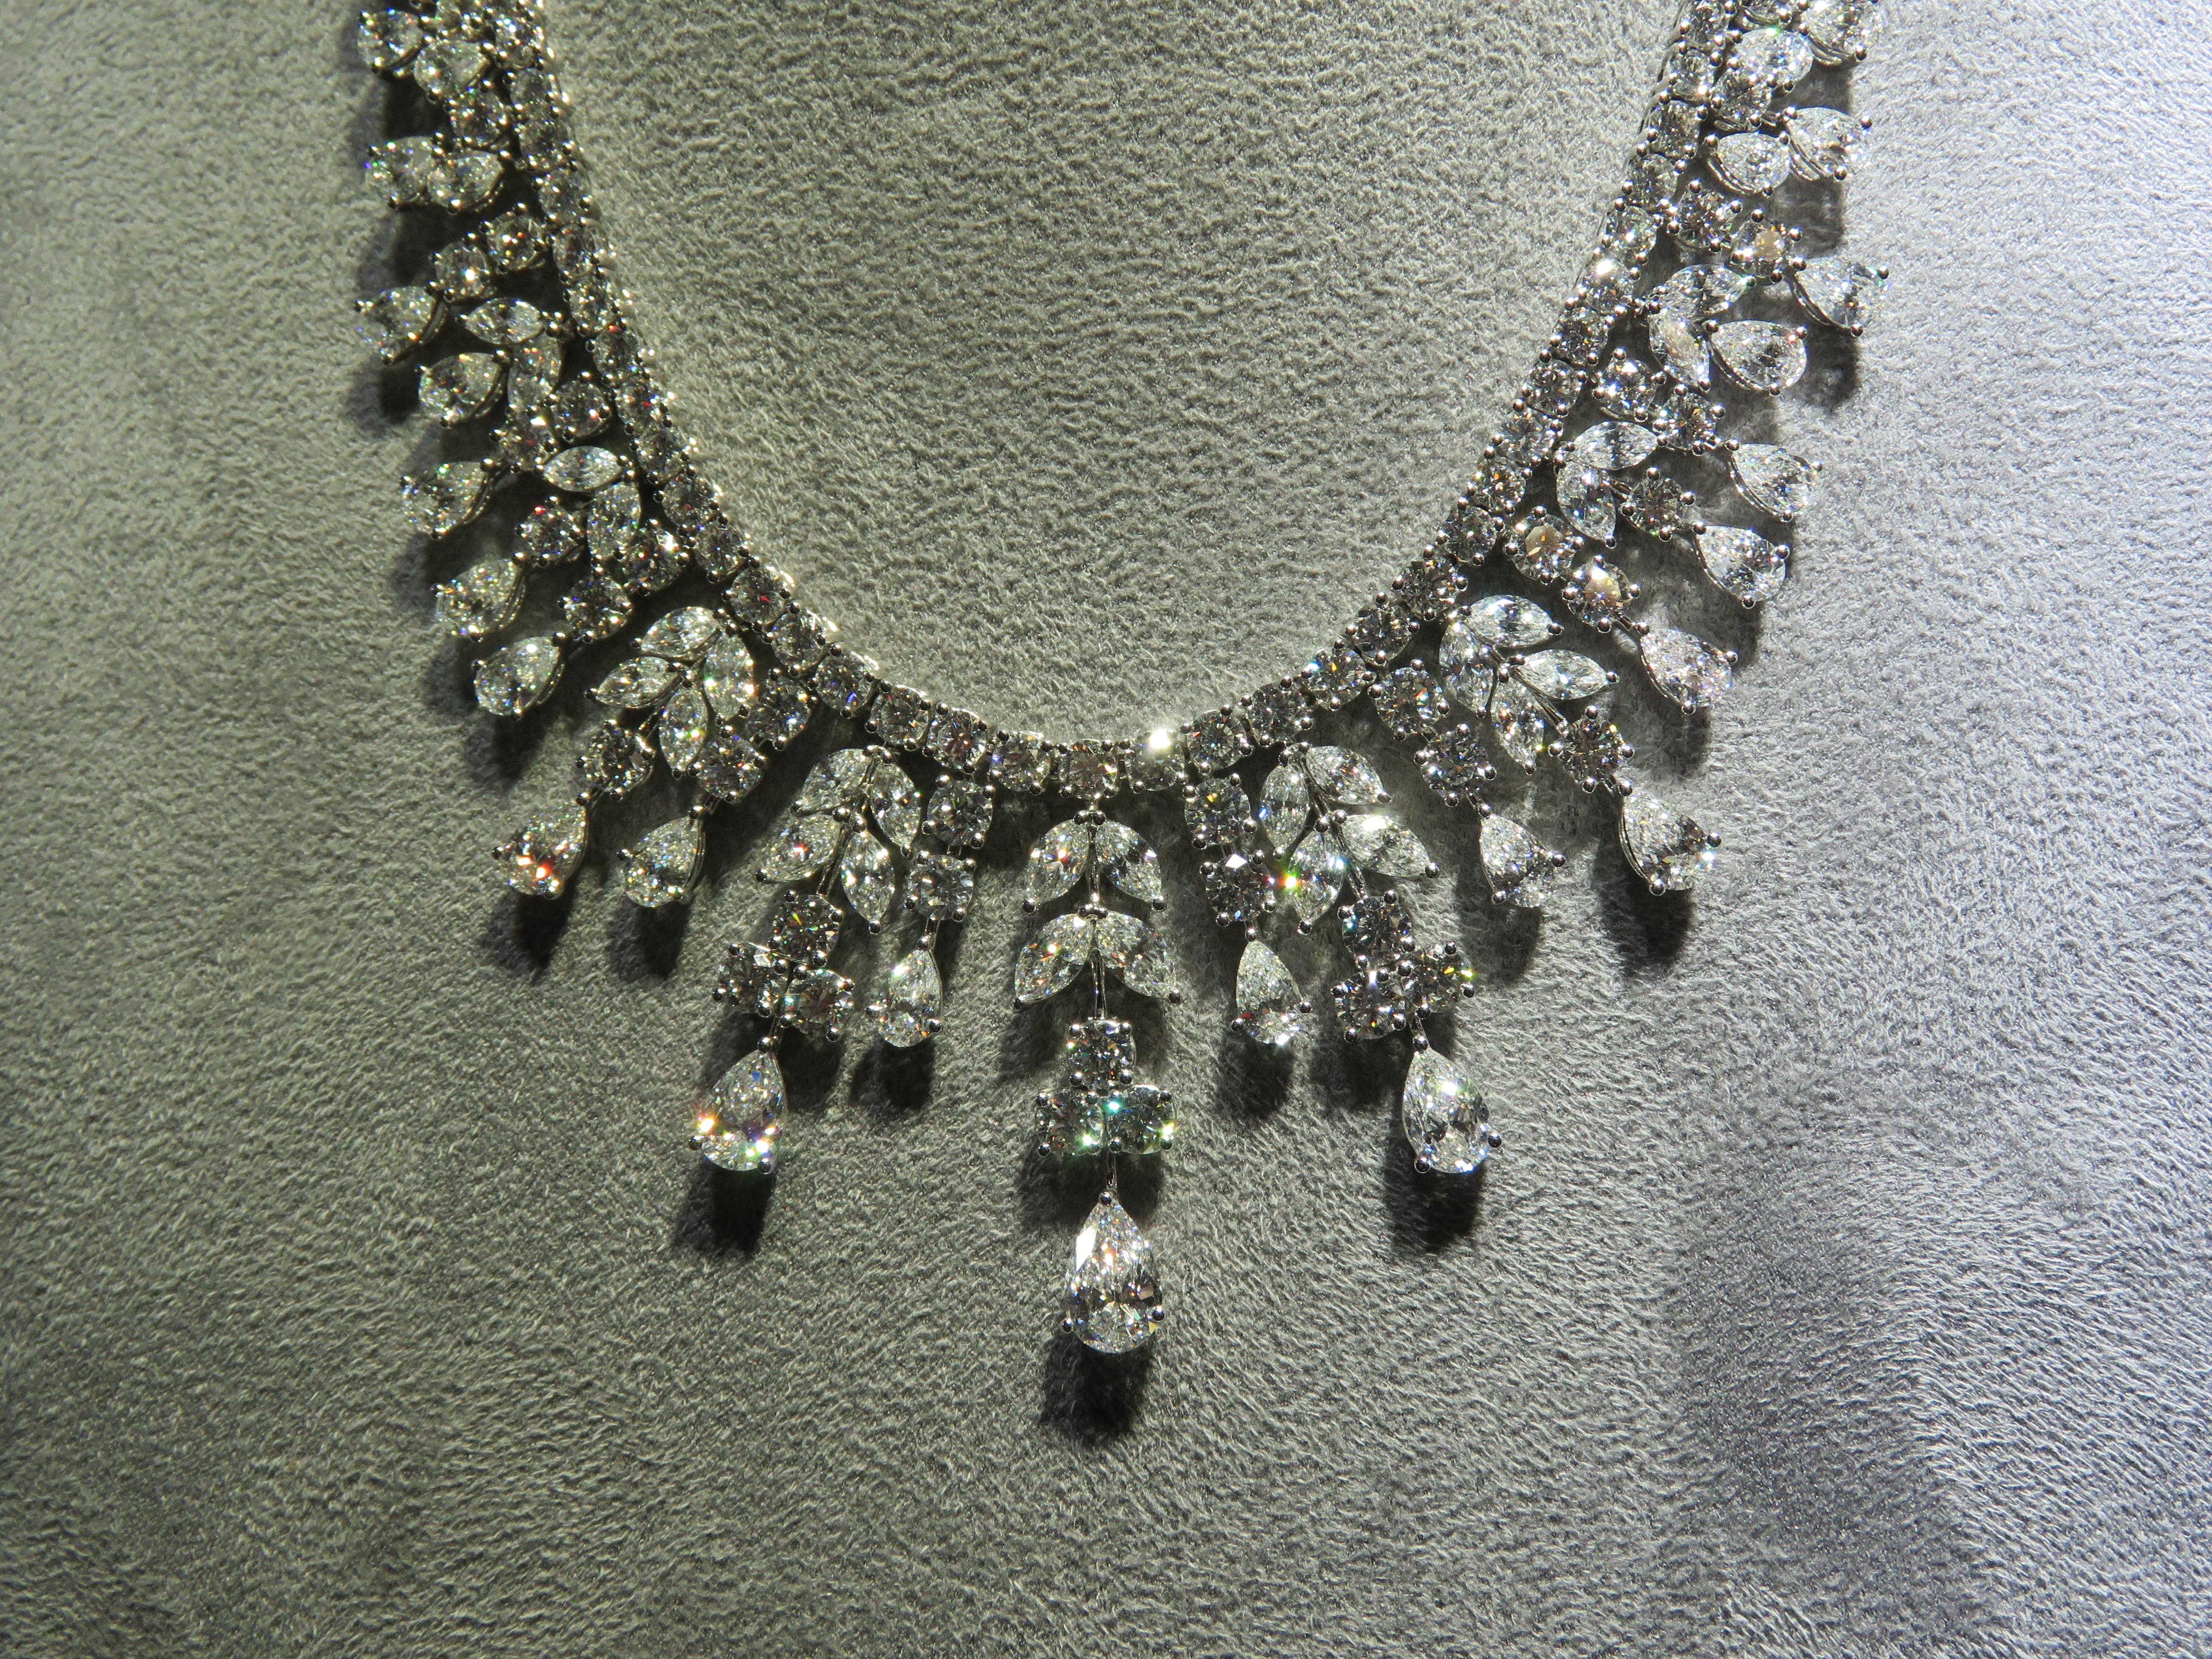 The Following Item we are offering is a Rare Important Gorgeous 18KT White Gold Winston Style Glistening GIA CERTIFIED Fancy Diamond Elaborate Strand Necklace!!!! This Necklace is Outstanding Multi Pear Shaped Glittering Diamond Necklace with 3